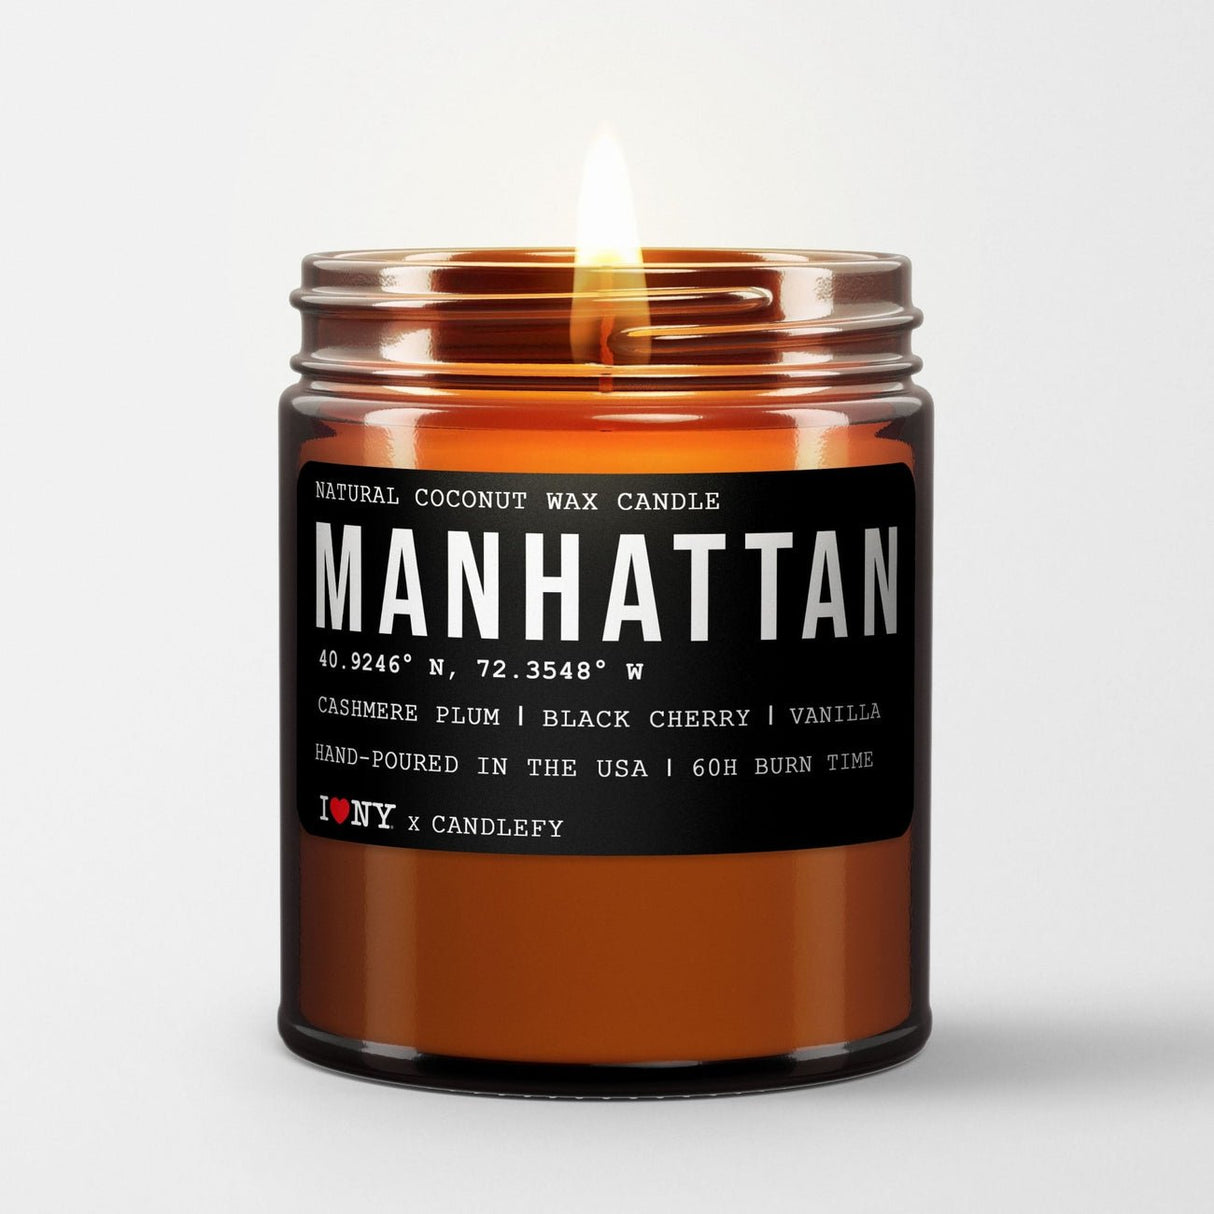 New York City Scented Candle Gift Box (4 candles / 240H Burn Time) - Candlefy